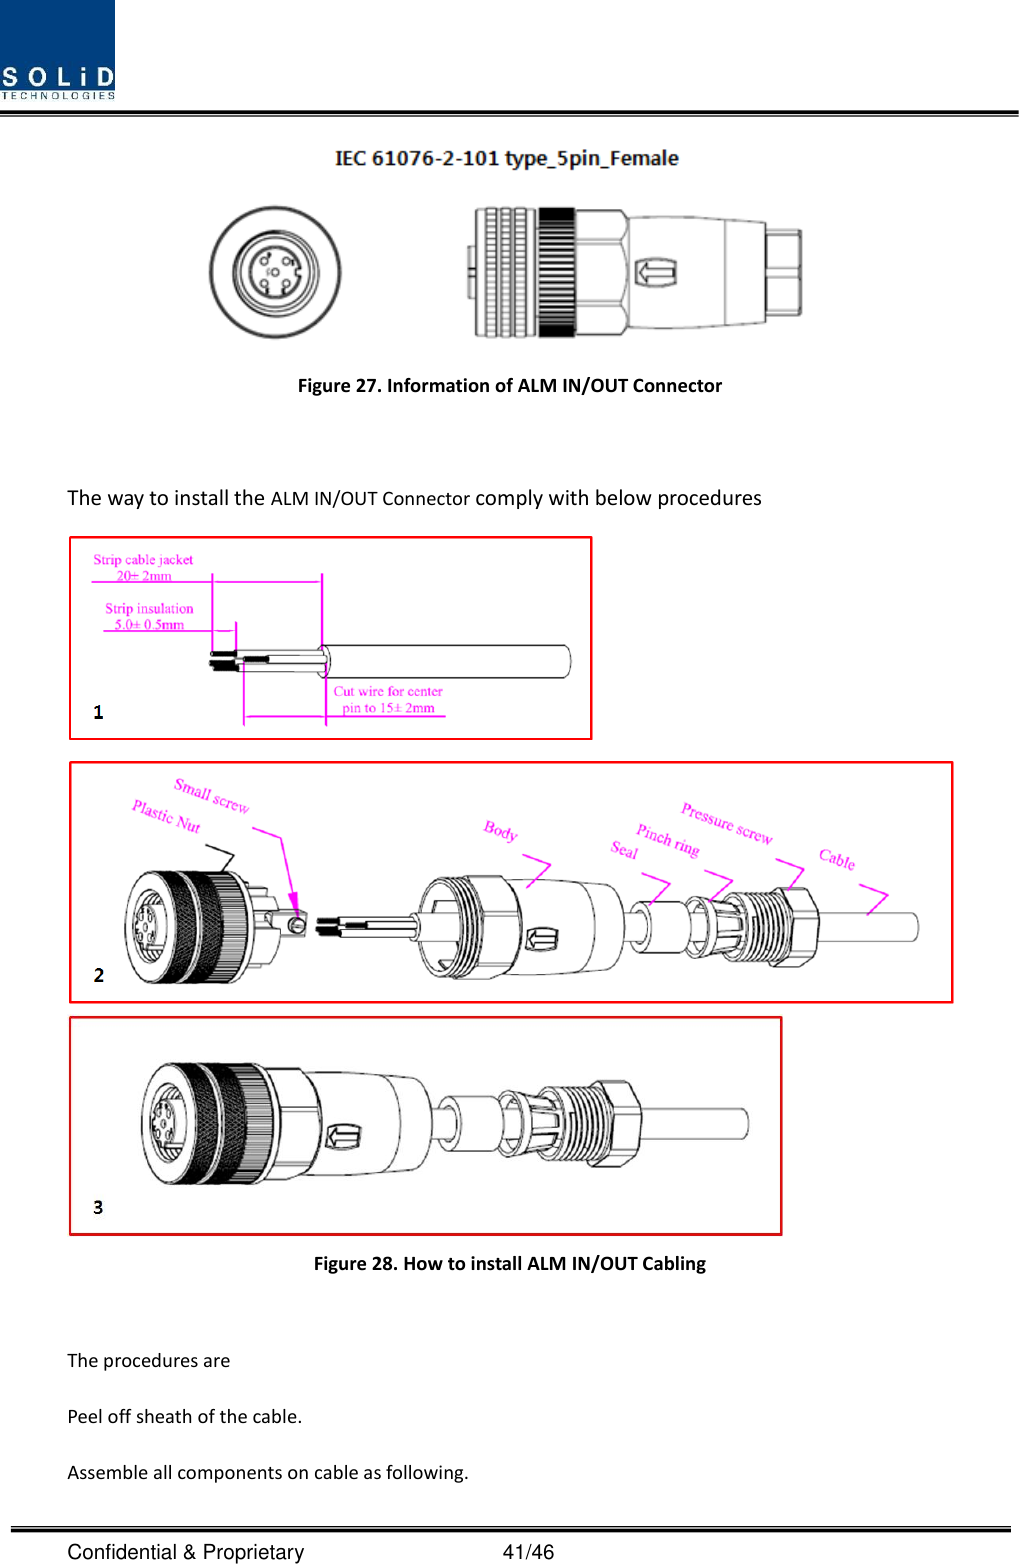  Confidential &amp; Proprietary                                      41/46  Figure 27. Information of ALM IN/OUT Connector  The way to install the ALM IN/OUT Connector comply with below procedures    Figure 28. How to install ALM IN/OUT Cabling  The procedures are Peel off sheath of the cable. Assemble all components on cable as following. 